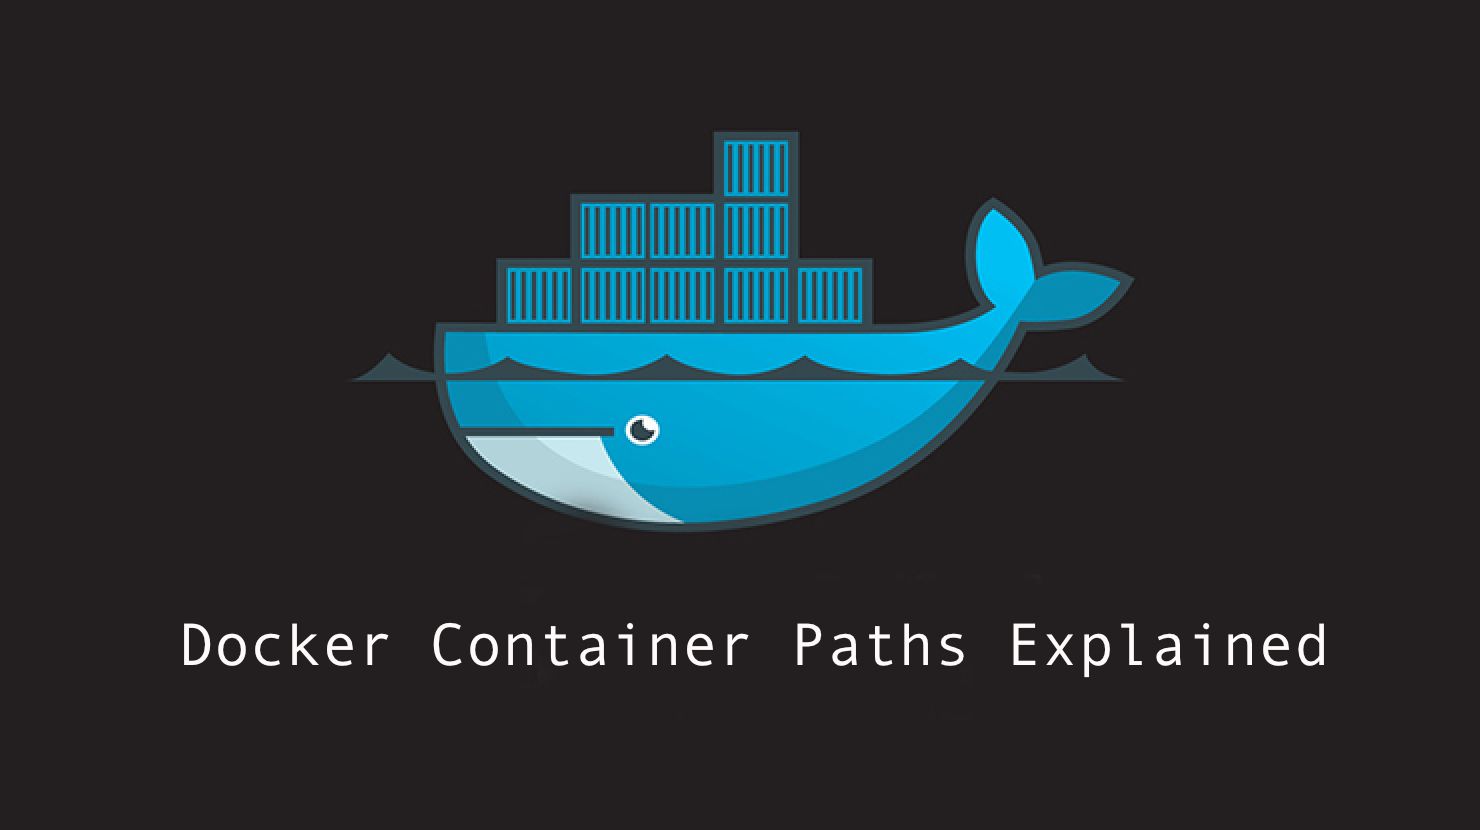 Where are Docker Images Stored? Docker Container Paths Explained